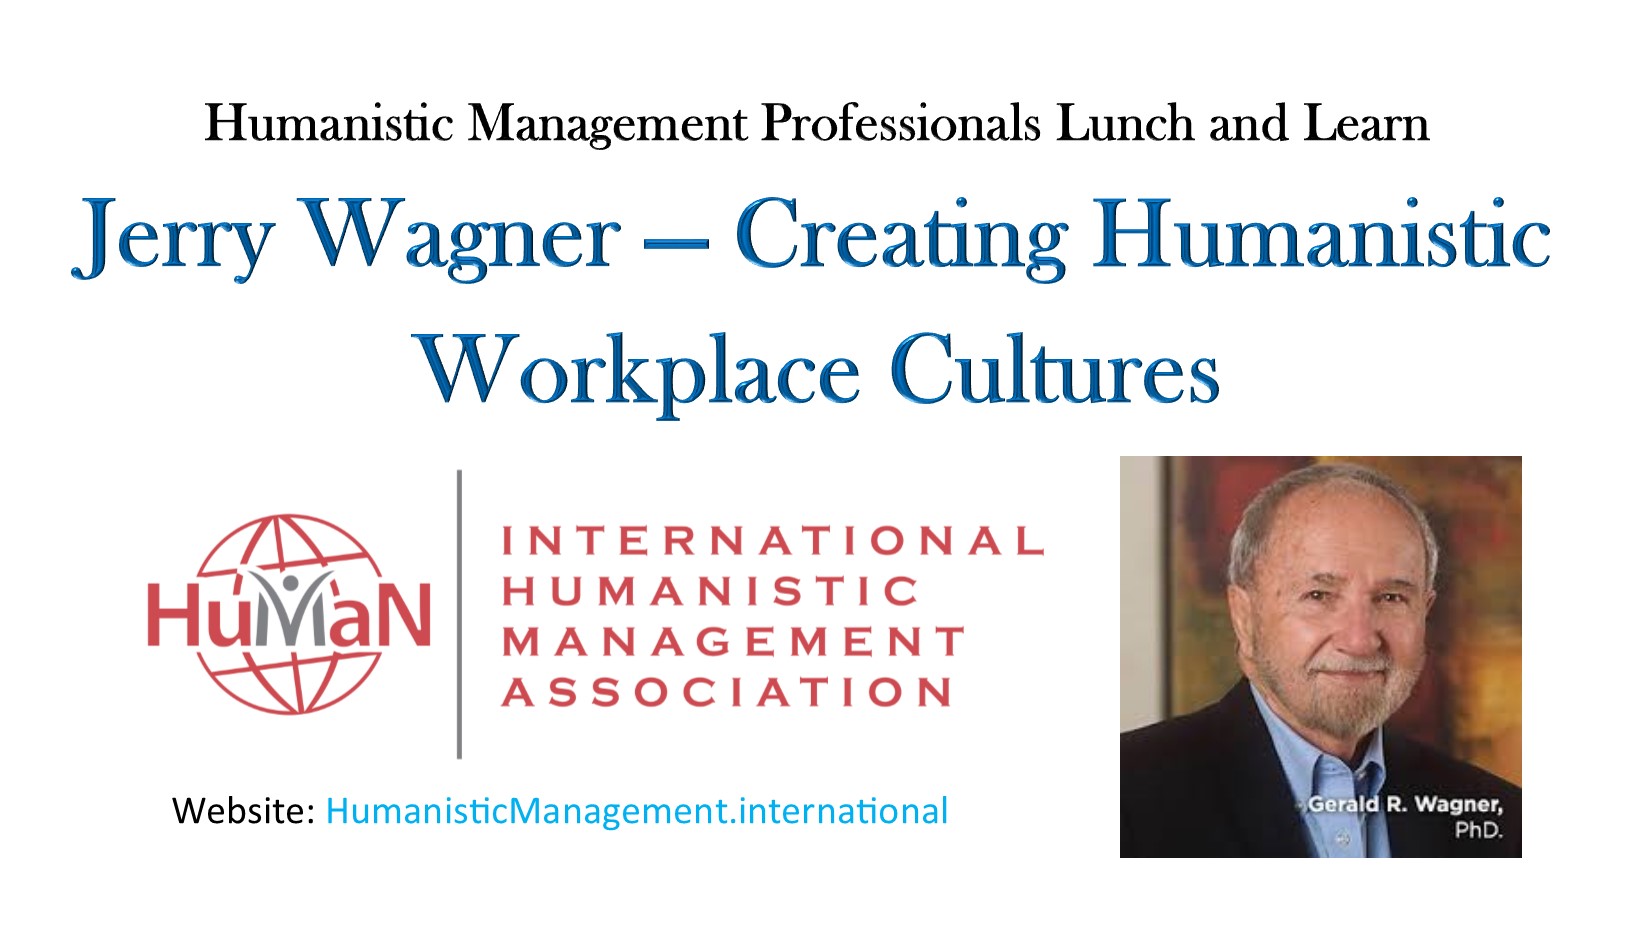 Jerry Wagner, Humanistic Professionals Lunch and Learn